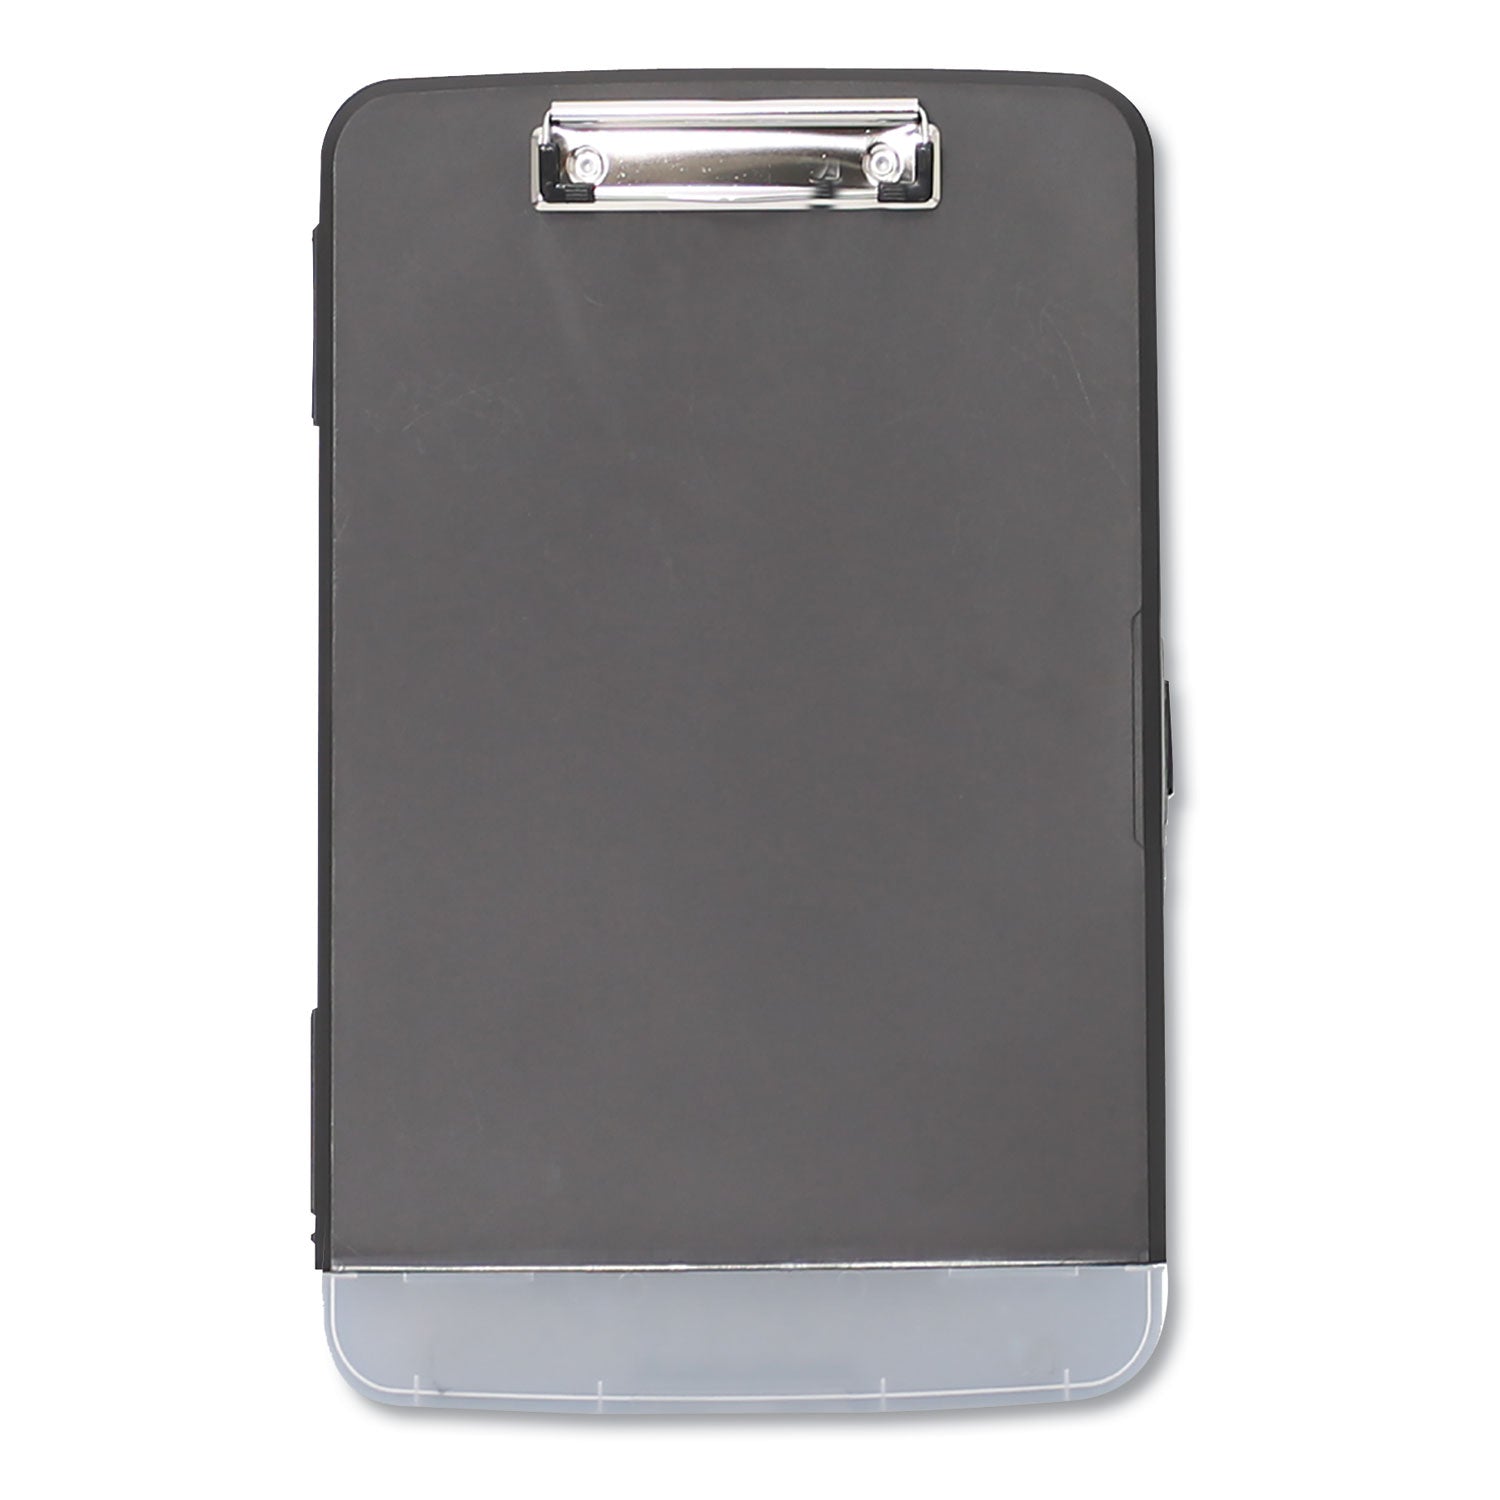 storage-clipboard-with-pen-compartment-05-clip-capacity-holds-85-x-11-sheets-black_unv40319 - 1